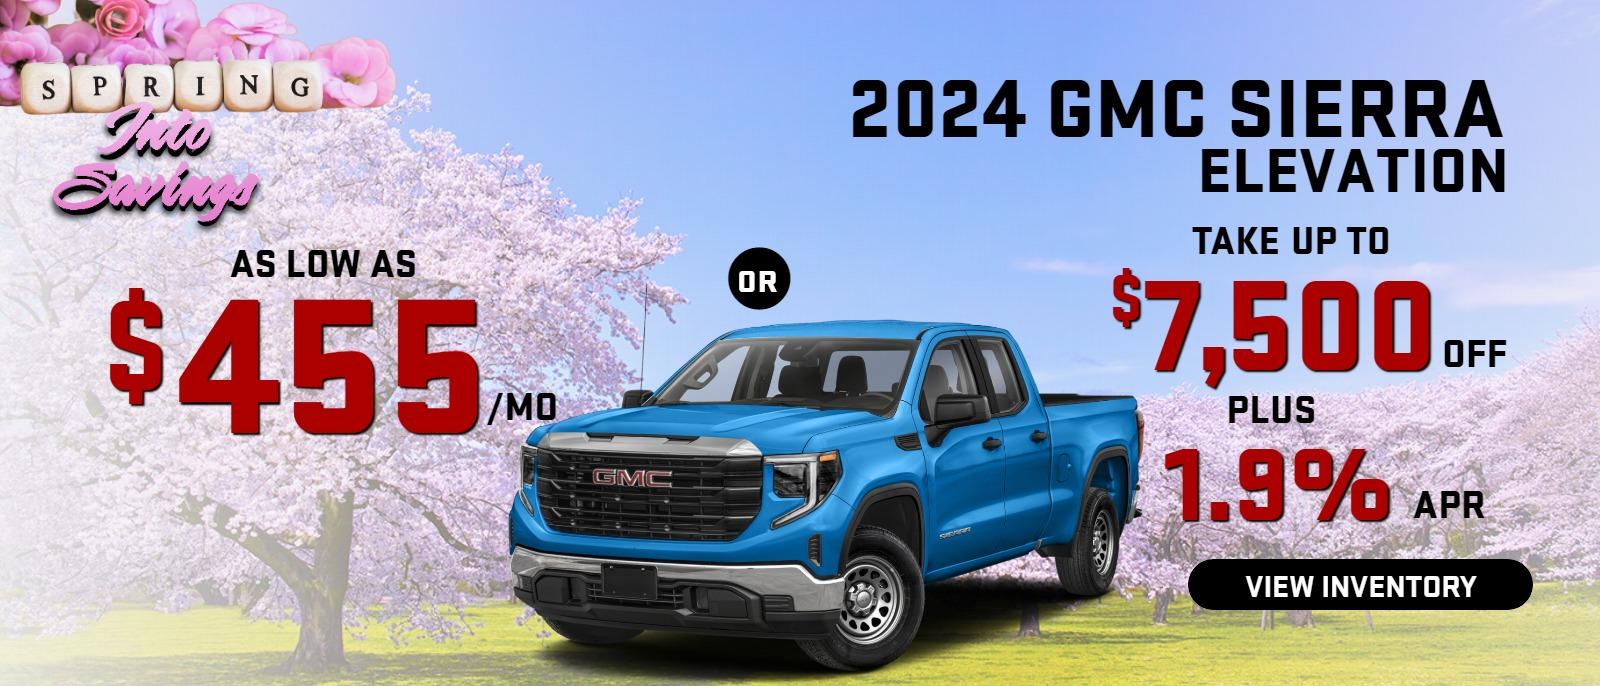 2024 sierra elevation
Stock G2404
AS LOW AS $455/mo
or
take up to $7500 OFF
PLUS 
1.9 % finance